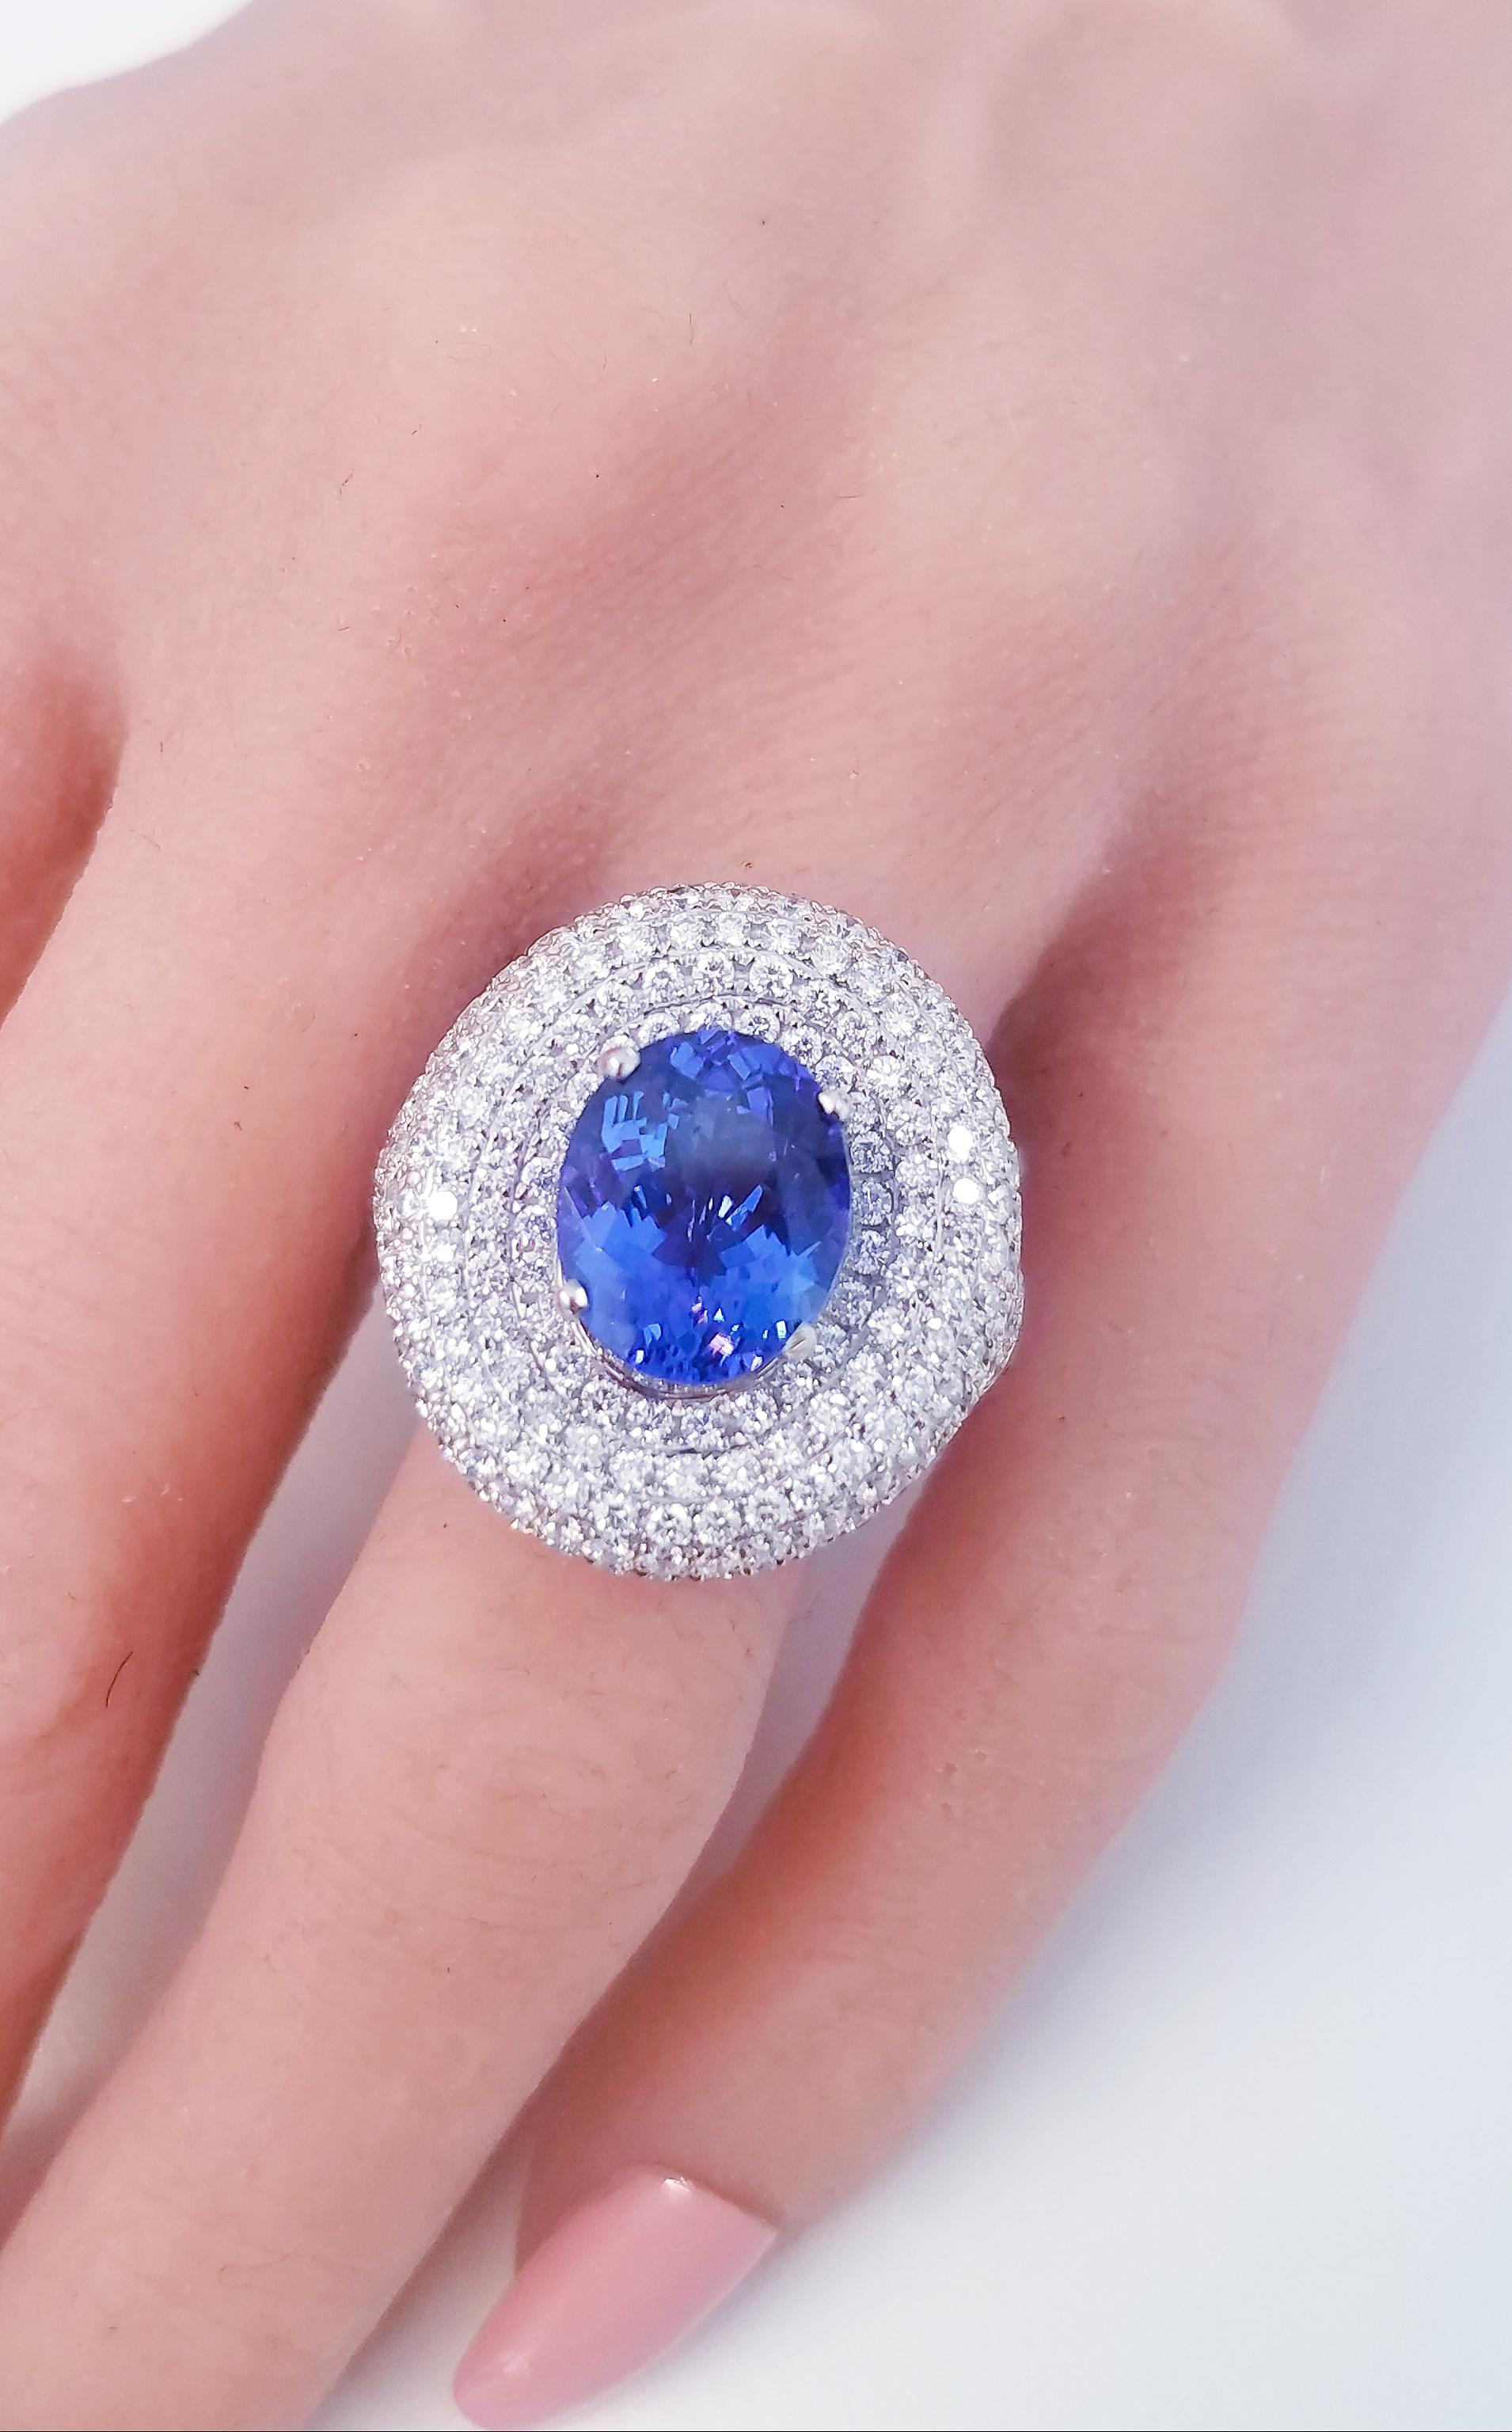 This lavish brightly polished 18 karat white gold smooth oval shaped cocktail ring presents one hand selected fine quality oval cut tanzanite prong set in the center, originating from Tanzania with a beautiful color saturation. A total of 5.16